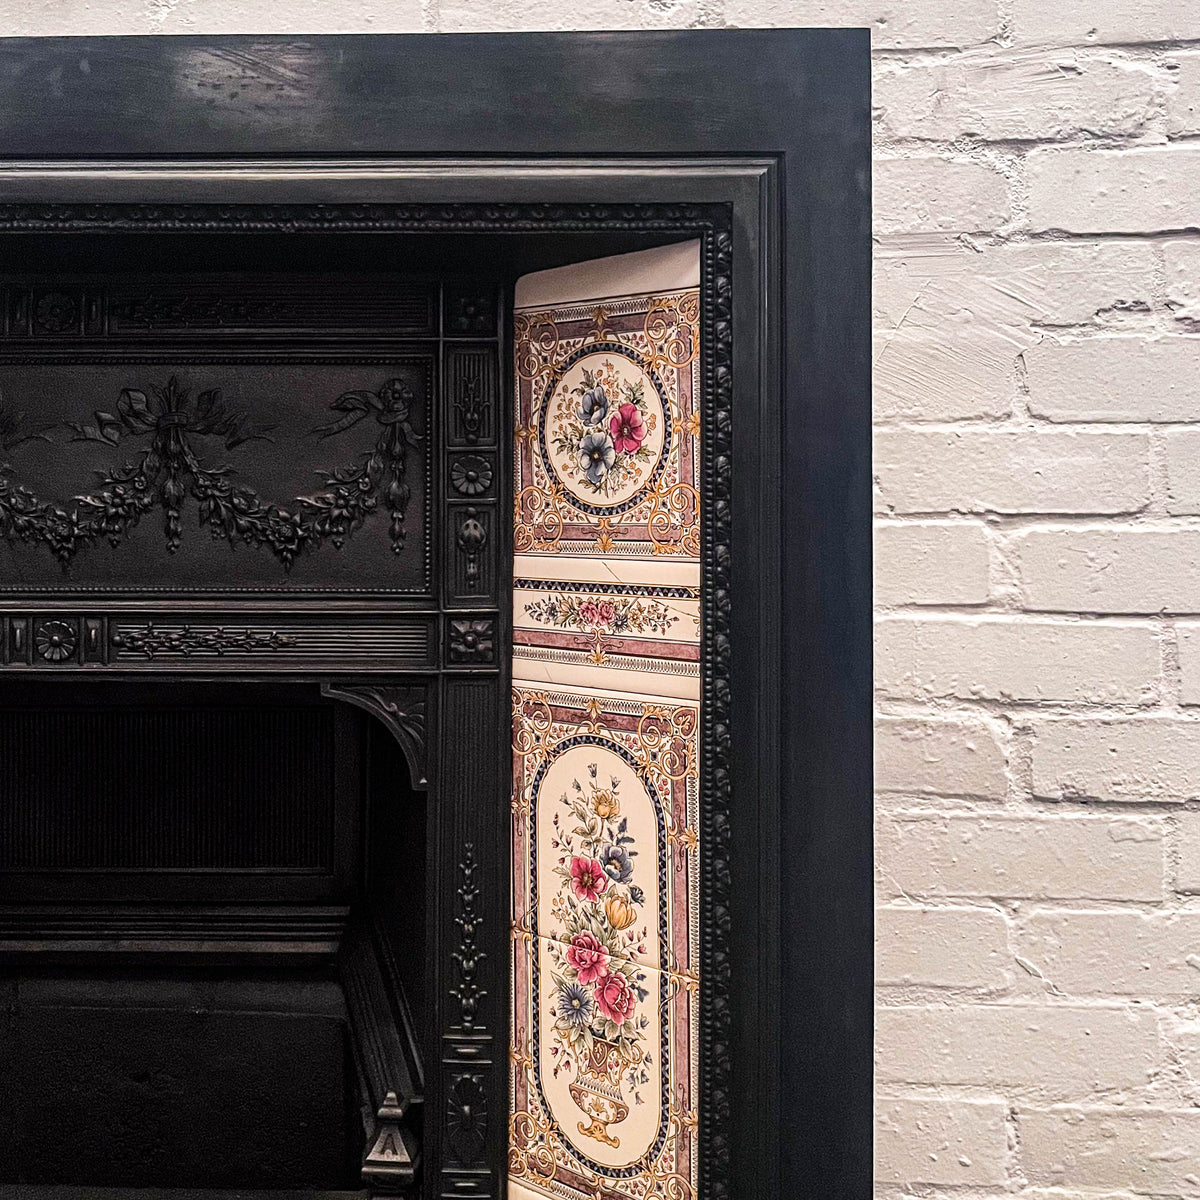 Antique Victorian Cast Iron Tiled Fireplace Insert | The Architectural Forum